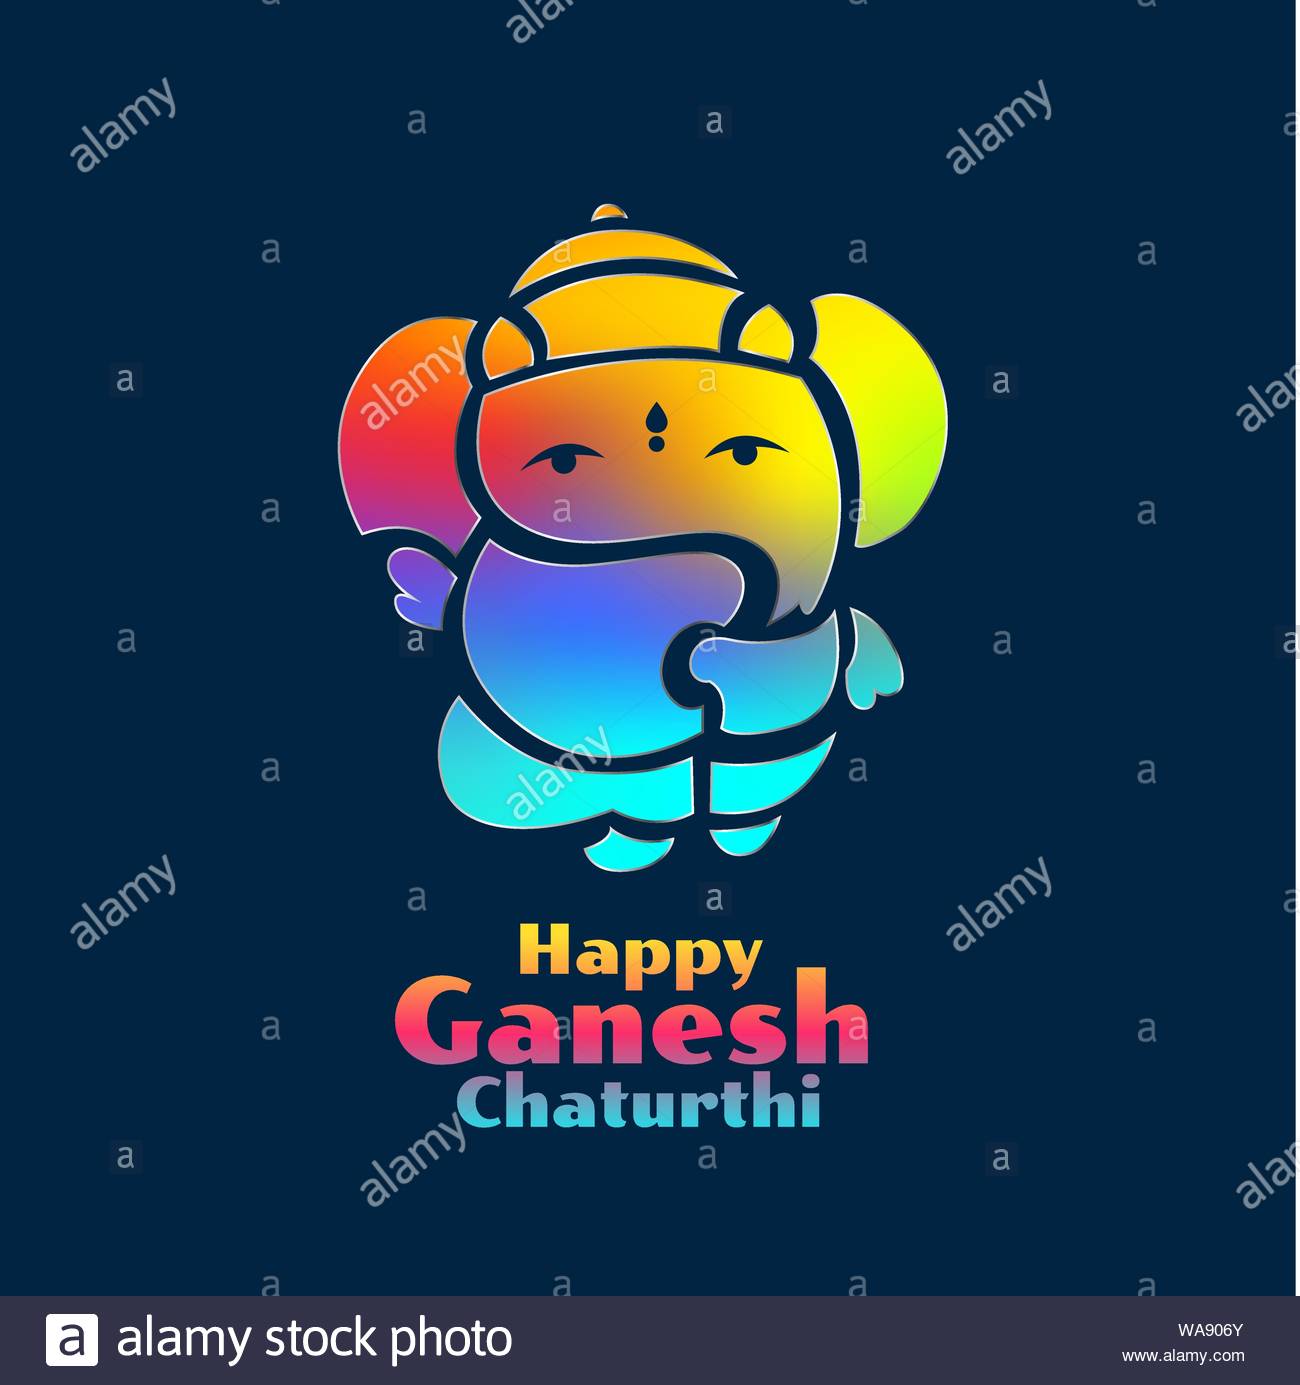 Download Free Lord Ganesha Colorful Greeting Card Illustration Background Ganpati Festival Banner Abstract Oil Paint Brush Stroke Pattern Hinduism Spiritual Stock Photo Alamy PSD Mockup Template